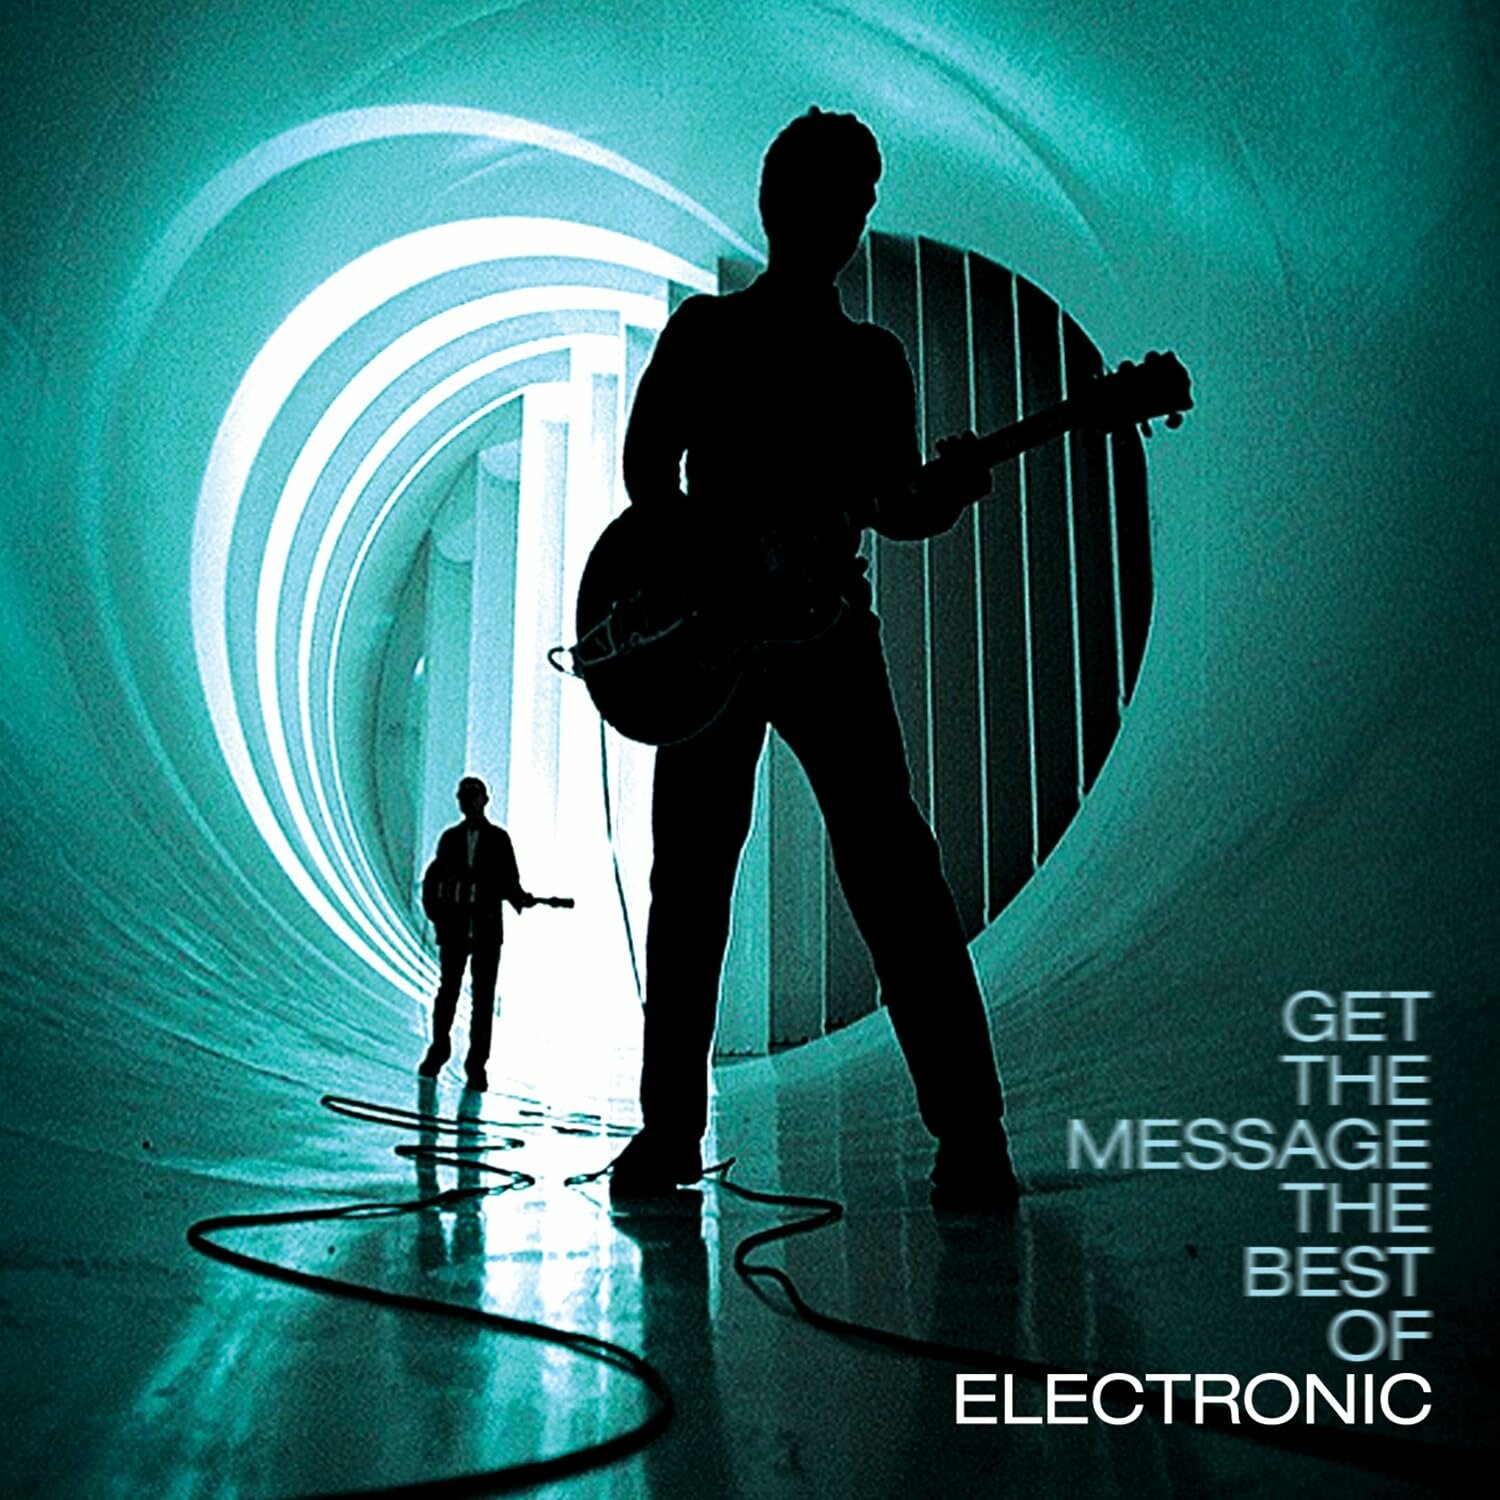 Виниловая пластинка Electronic. Get The Message - The Best Of Electronic (2 LP)